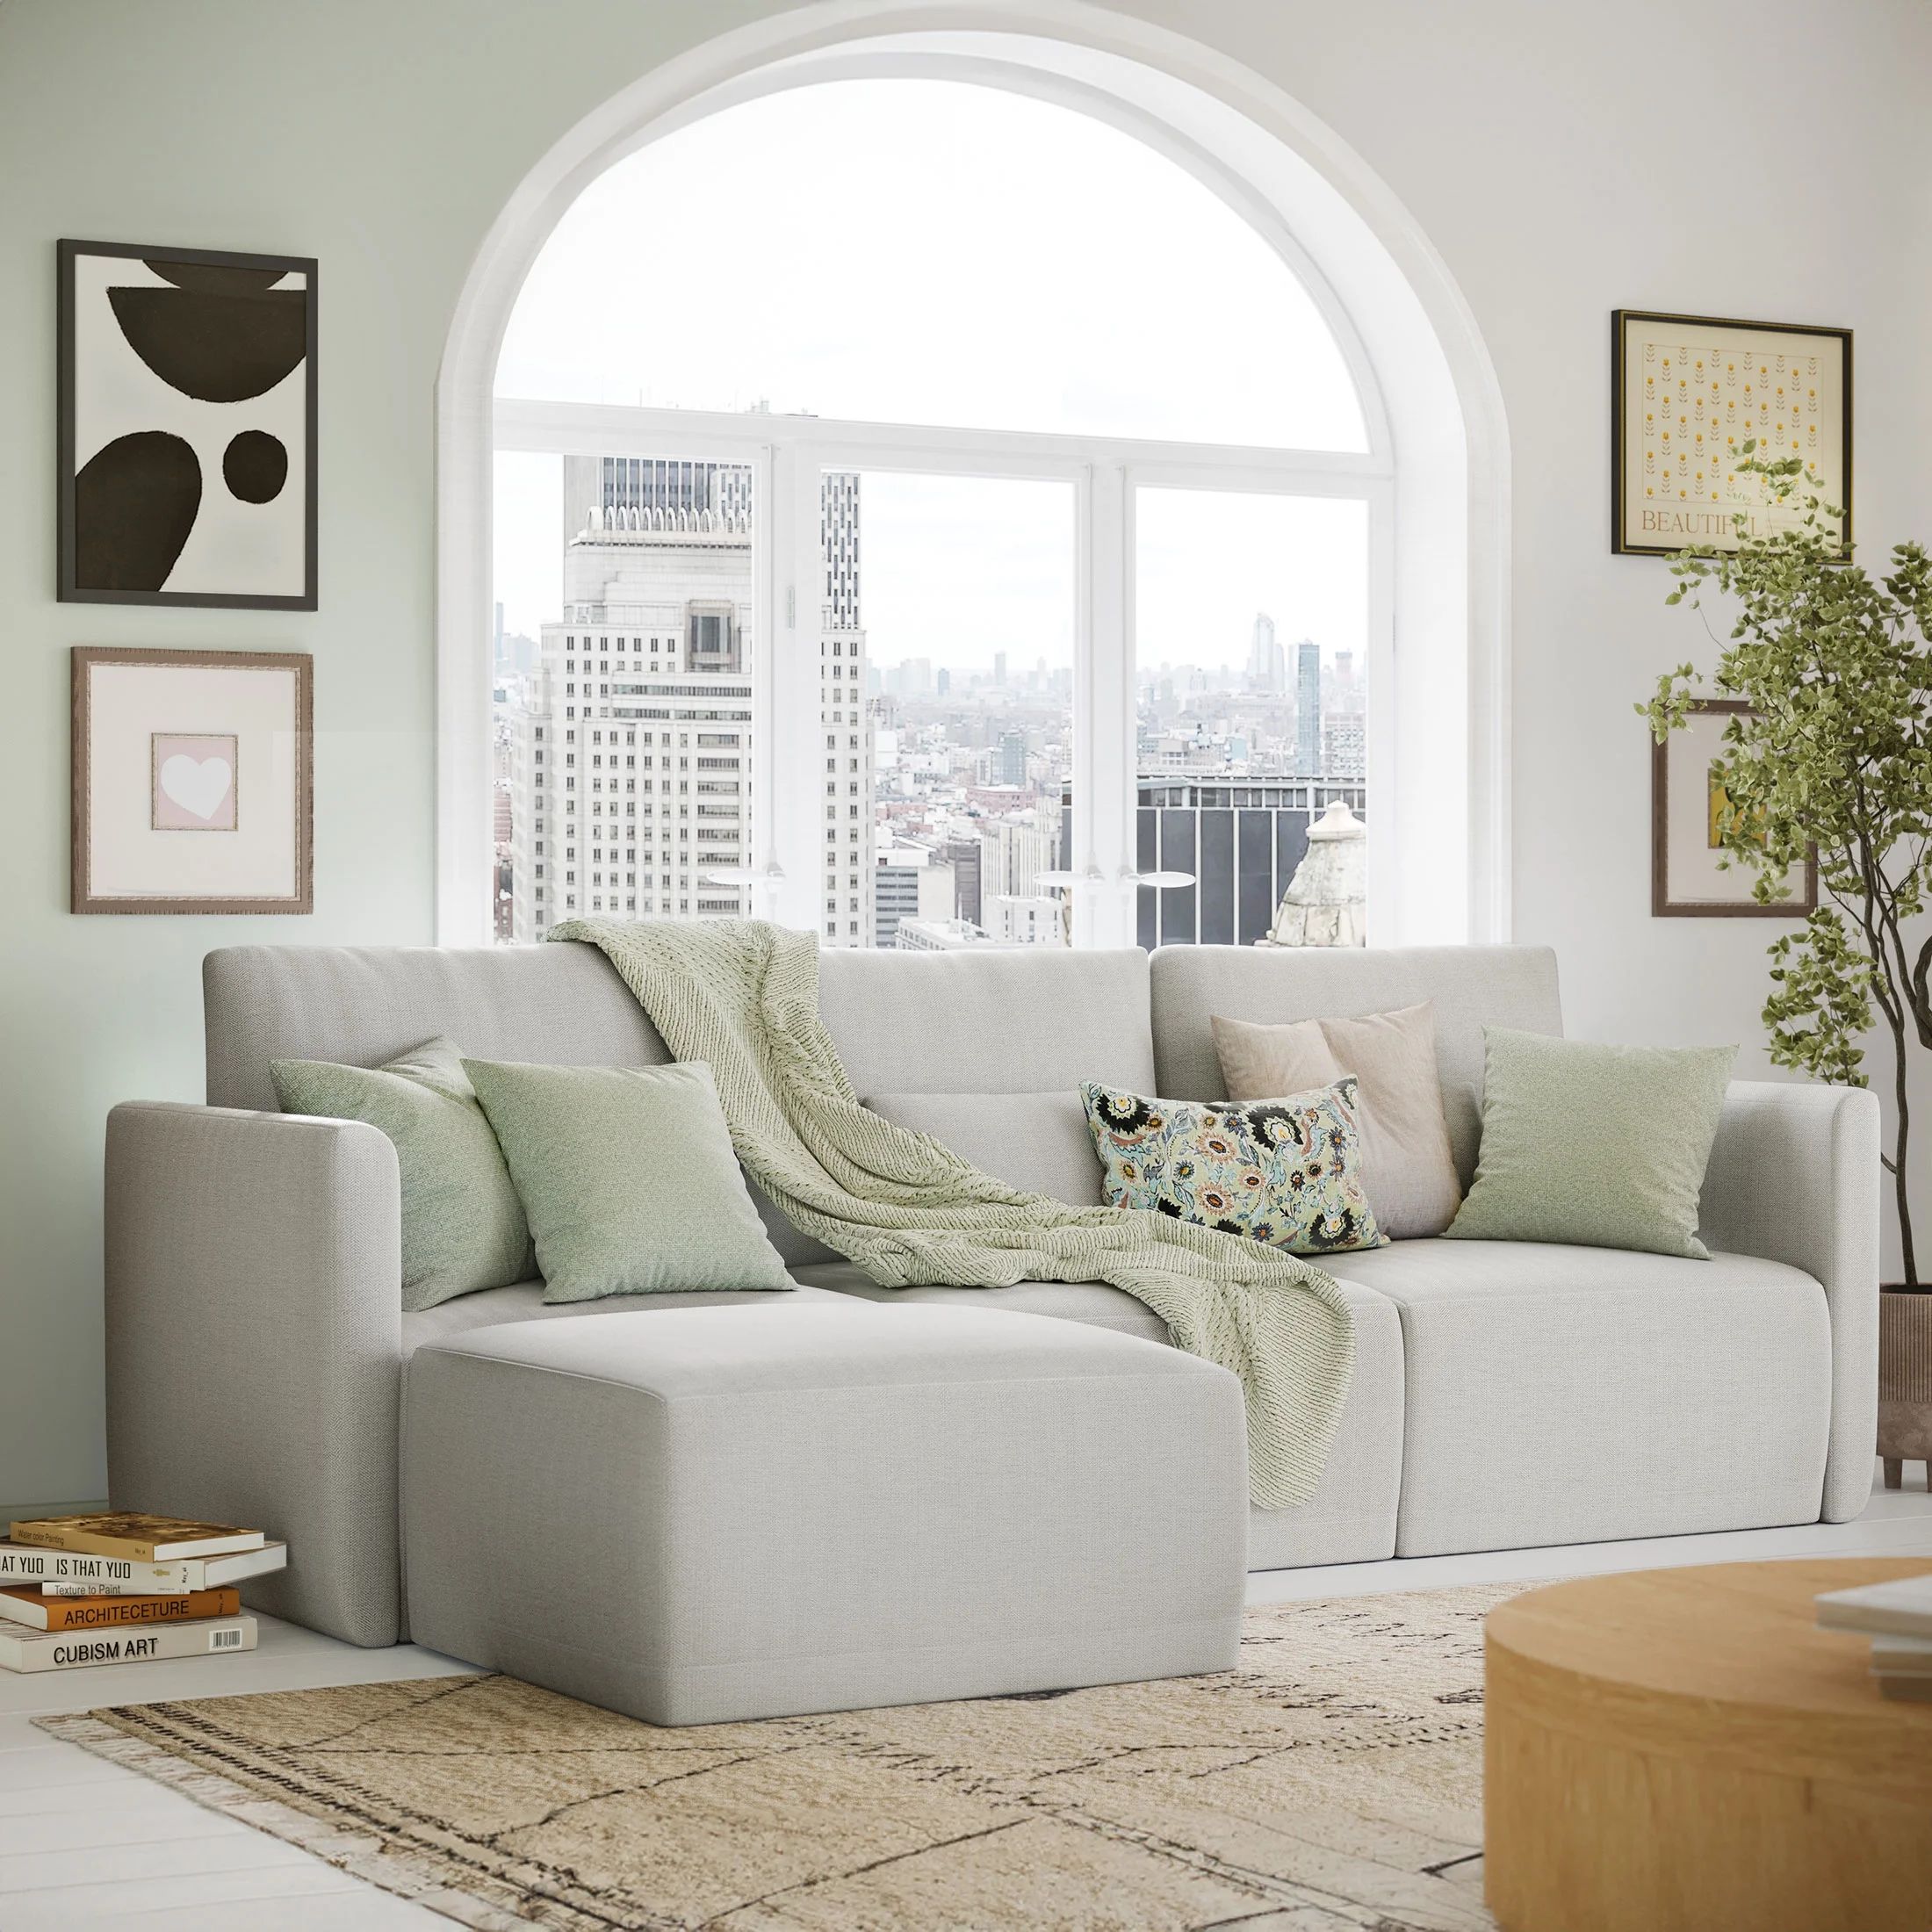 Beautiful Drew Modular Sectional Sofa with Ottoman by Drew Barrymore, Porcini Taupe | Walmart (US)